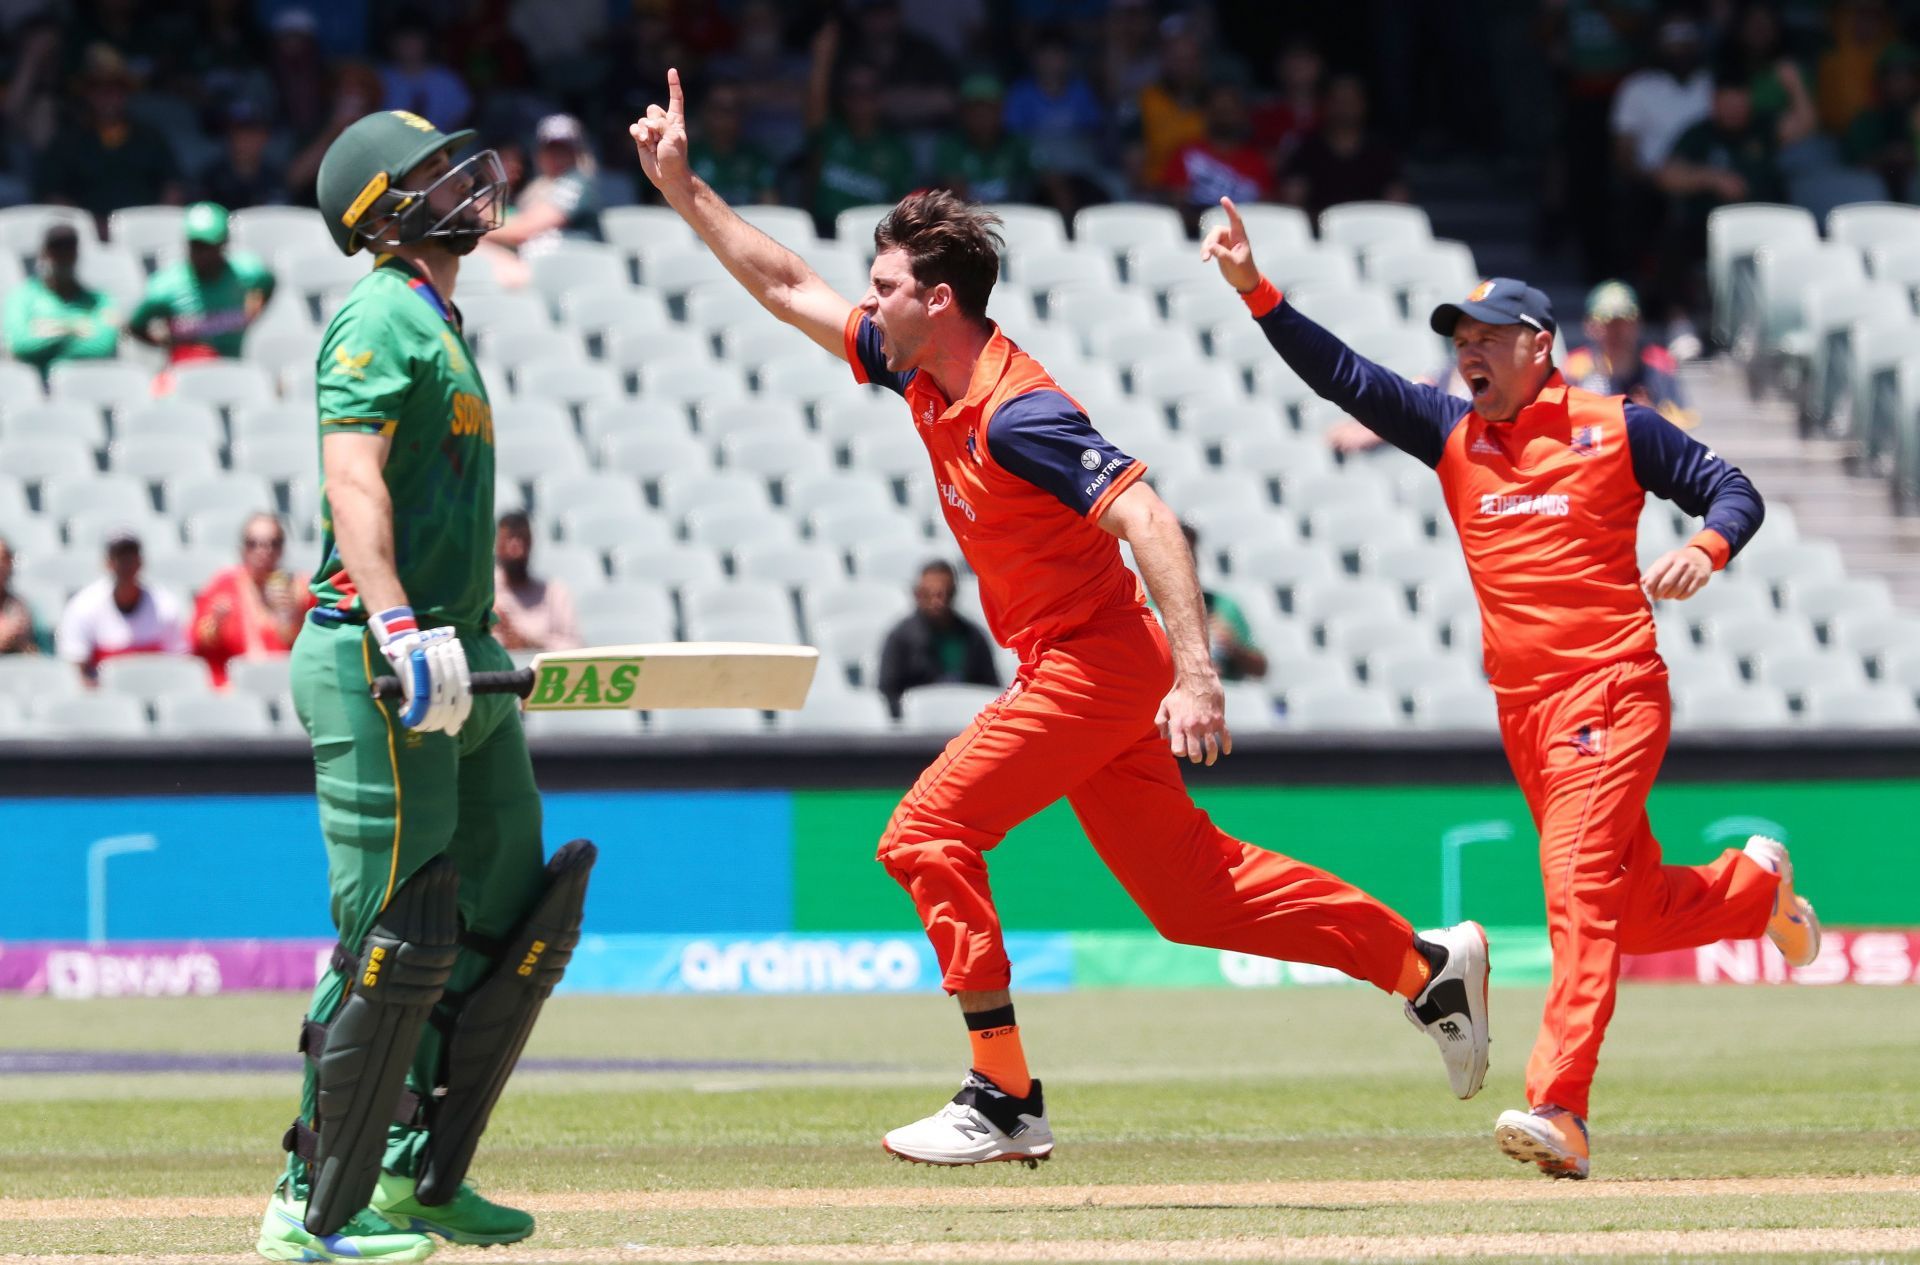 South Africa lost to the Netherlands. (Credits: Getty)